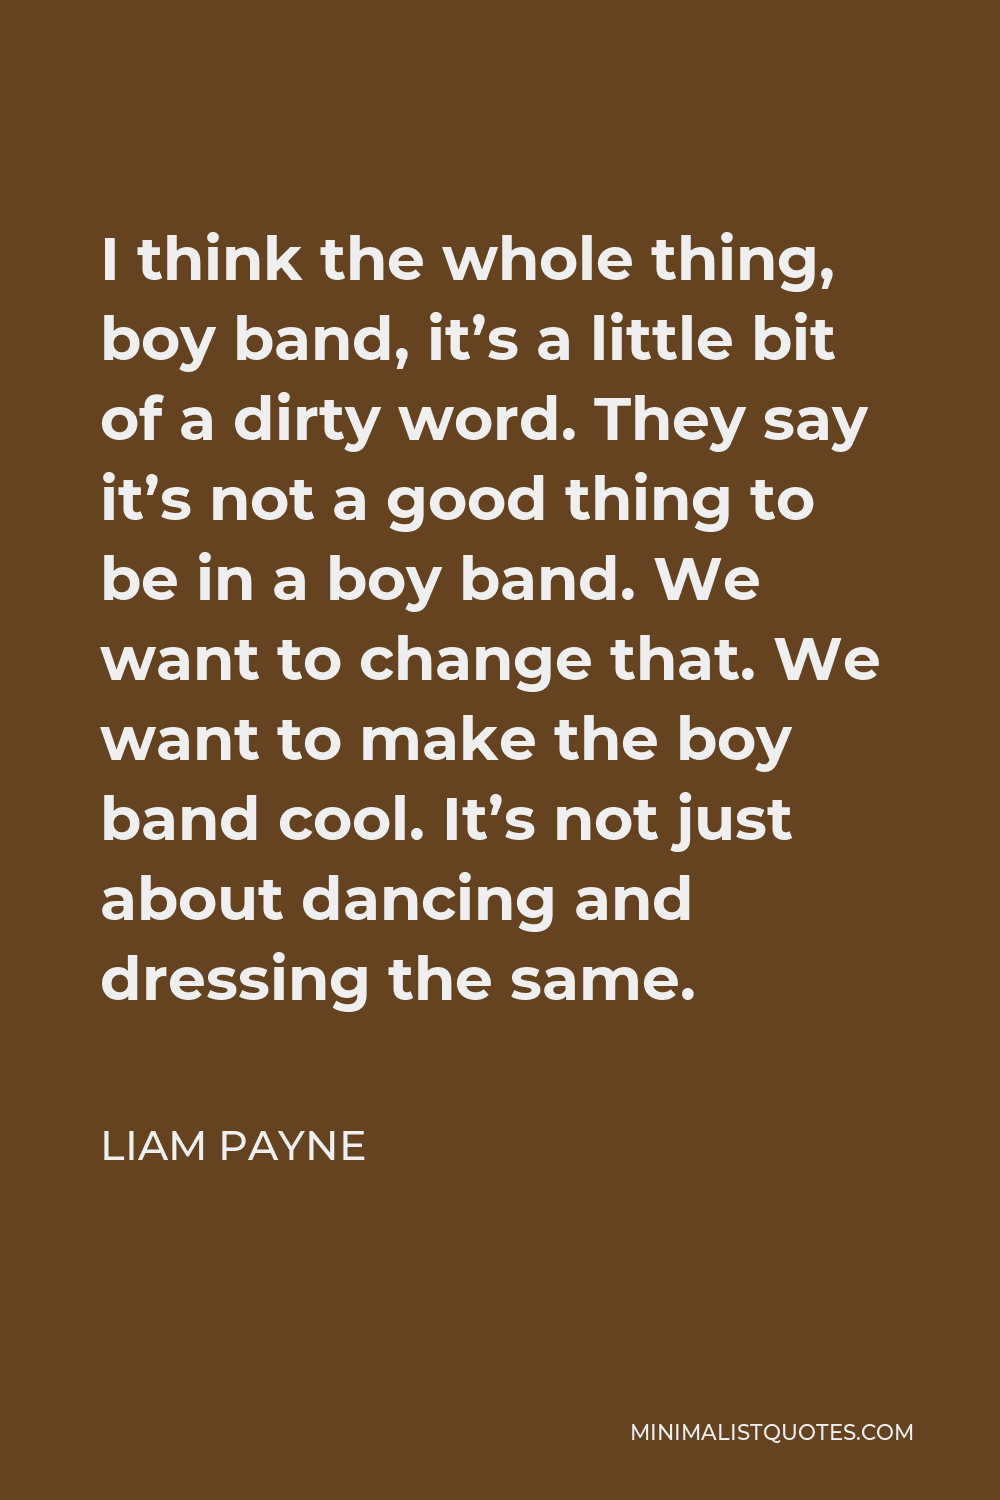 Liam Payne Quote - I think the whole thing, boy band, it’s a little bit of a dirty word. They say it’s not a good thing to be in a boy band. We want to change that. We want to make the boy band cool. It’s not just about dancing and dressing the same.